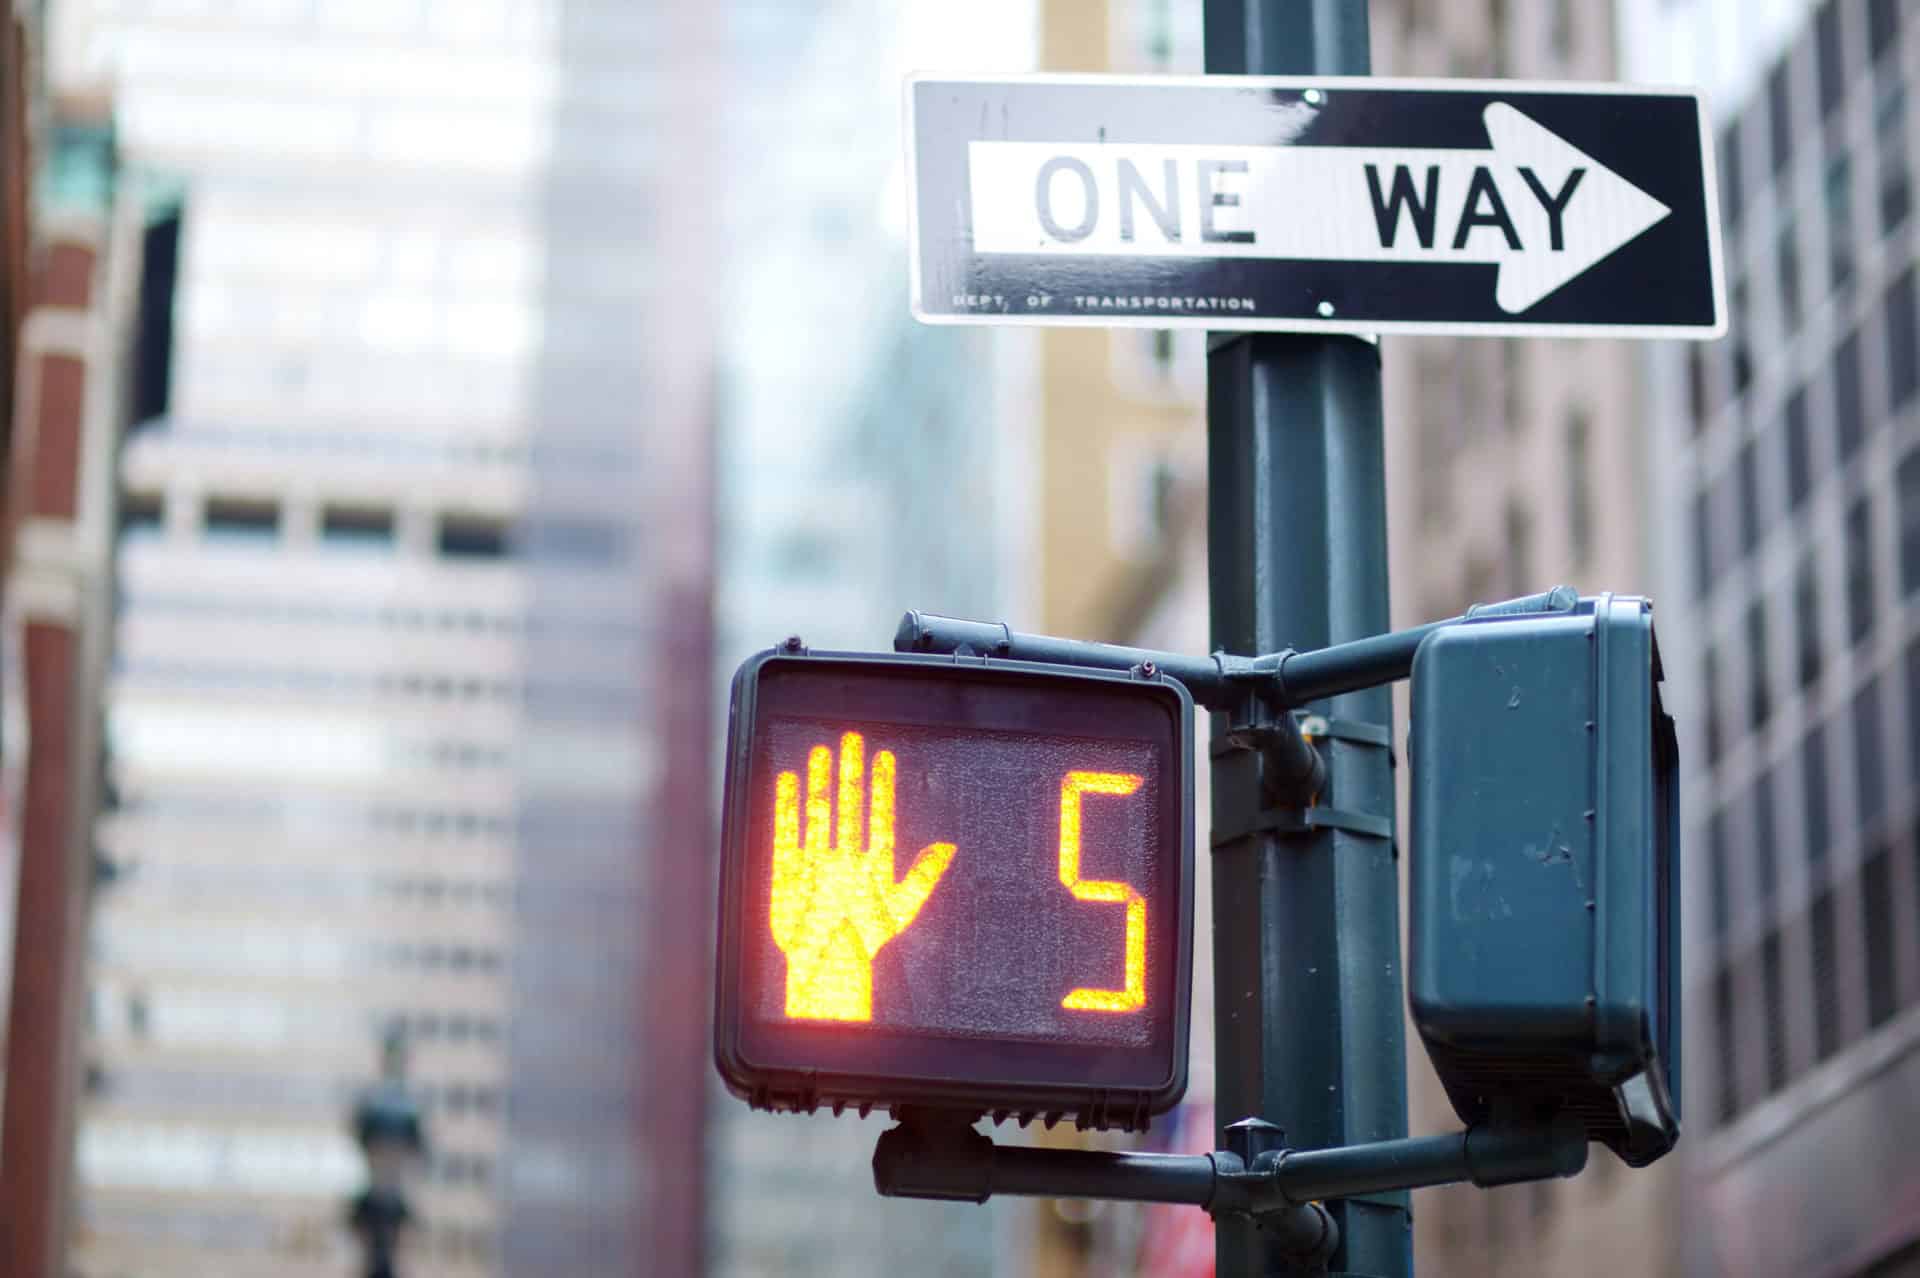 NY Pedestrian Laws: They Can Help, But Prevention Starts with You